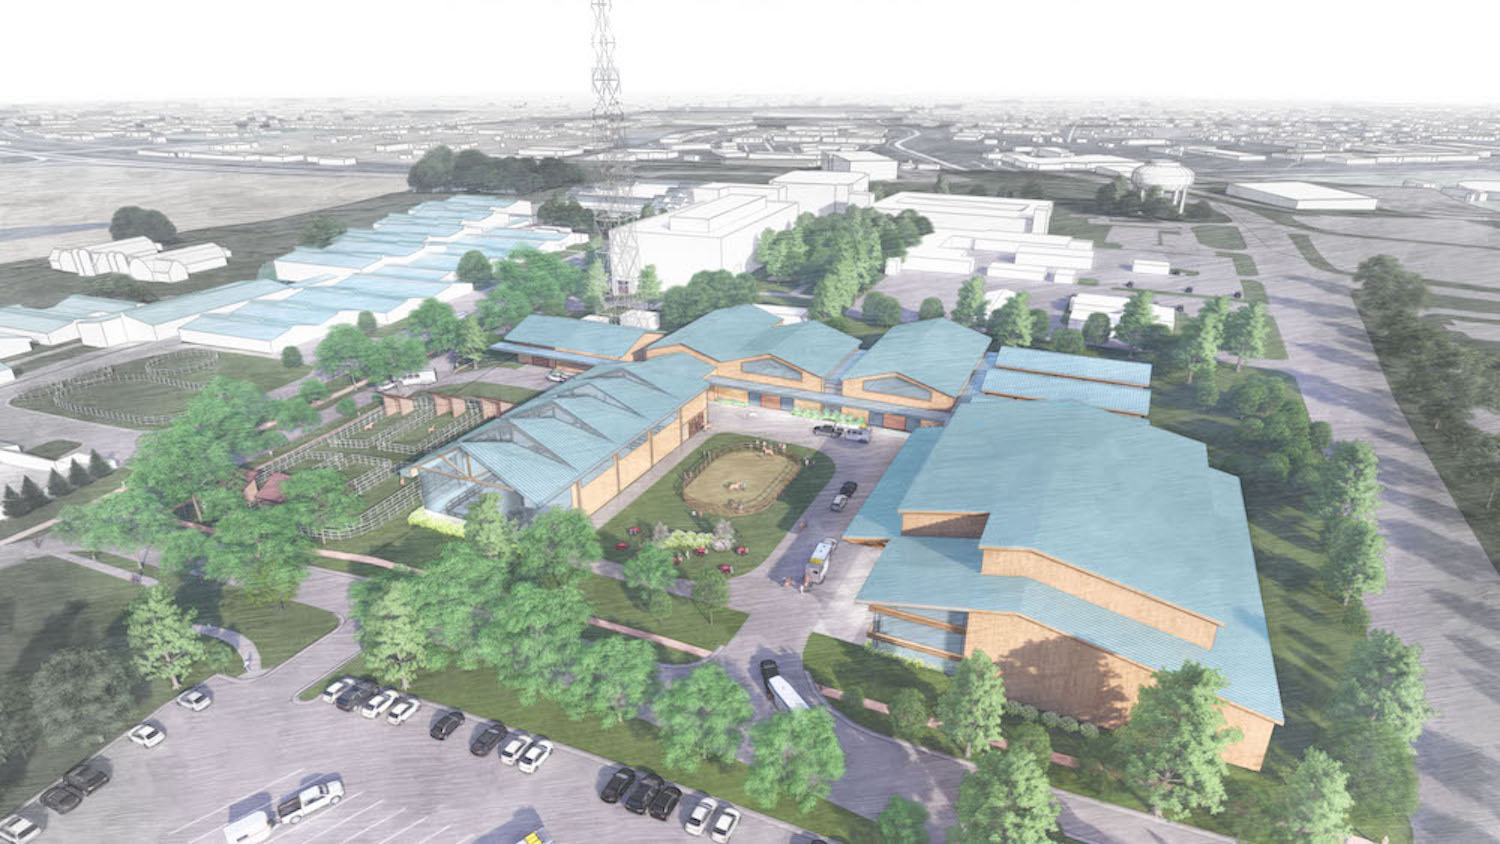 Rendering of the campus developments in the College of Veterinary Medicine